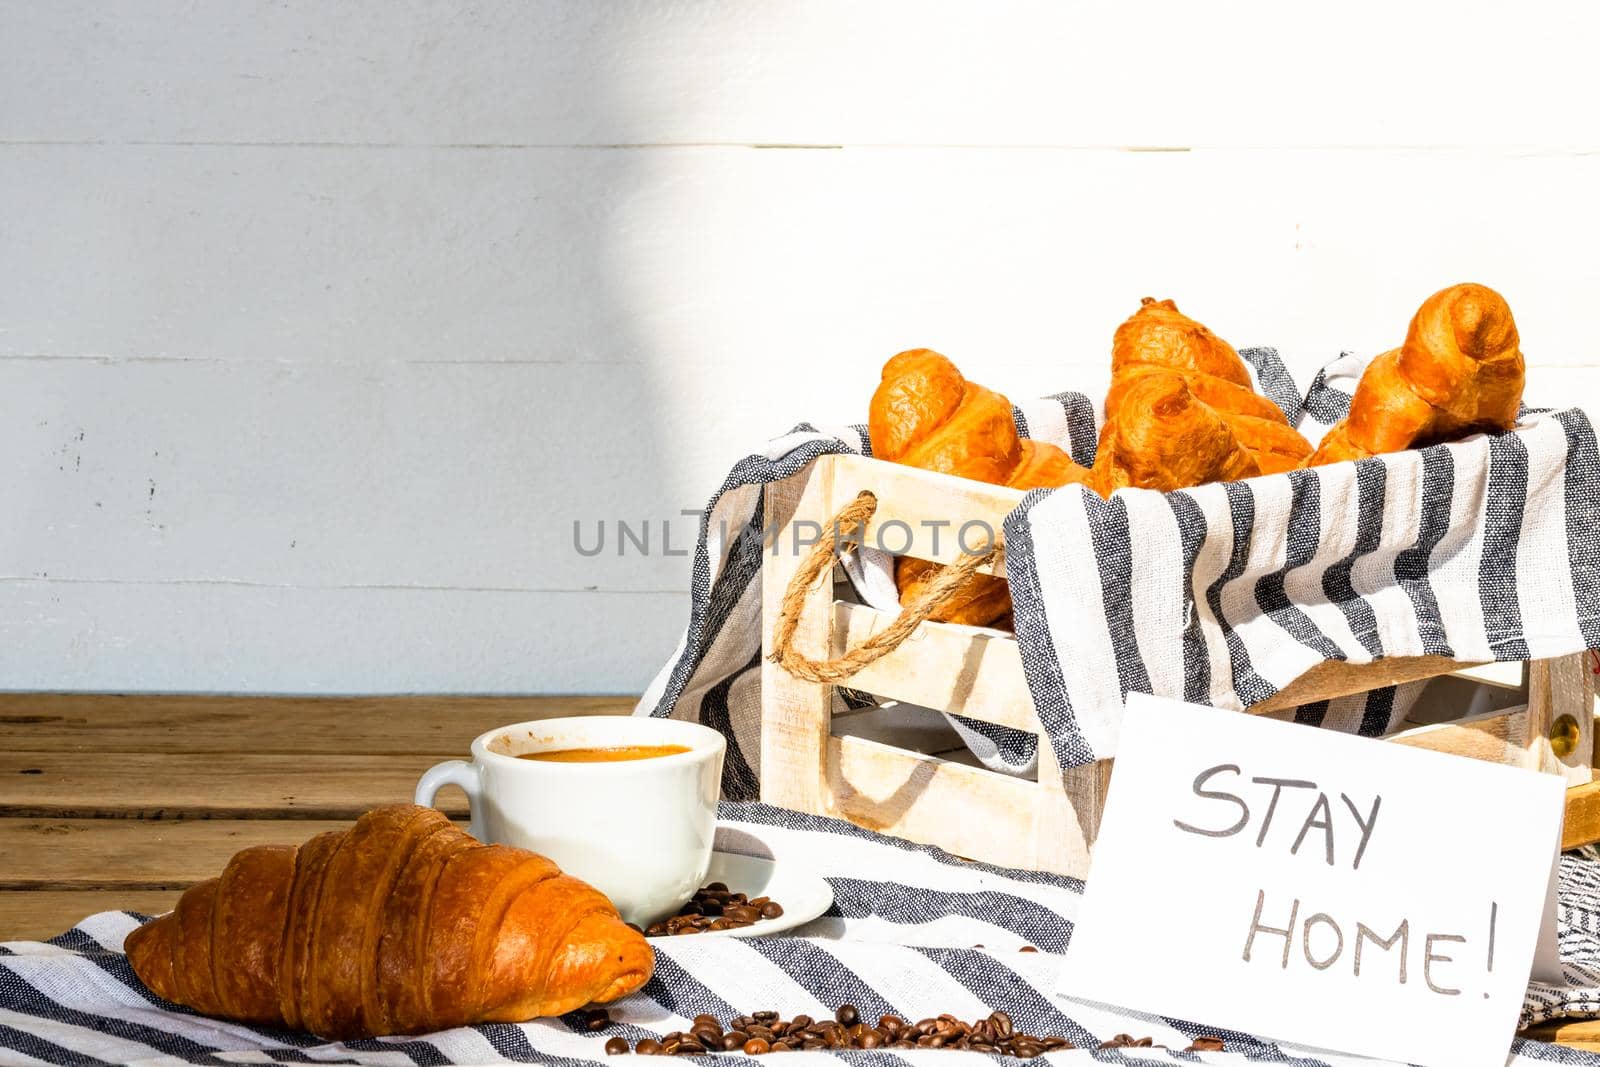 Coffee cup and buttered fresh French croissant on wooden crate. Food and breakfast concept. Morning message “stay home” on white board